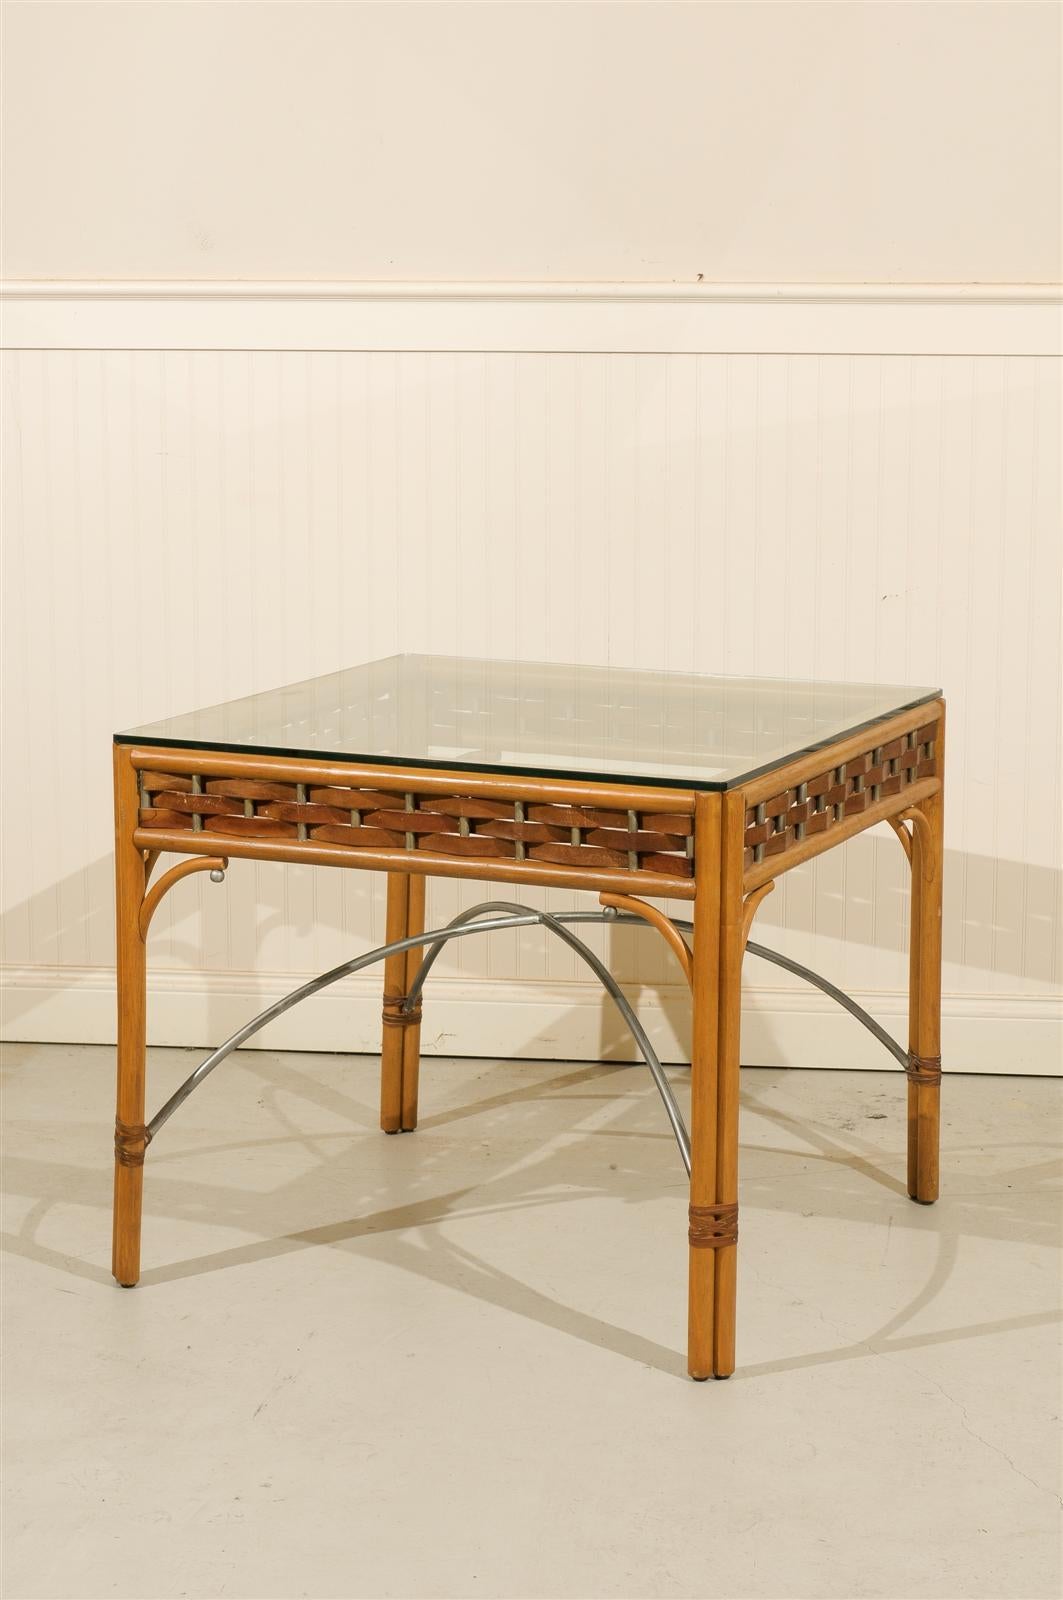 A beautiful vintage rattan and glass card or game table, circa 1980.  Lovely leather and wrought iron accents highlight the piece.  Excellent Restored Condition, the table has been re-lacquered.  Matching set of four ( 4 ) chairs are available in a